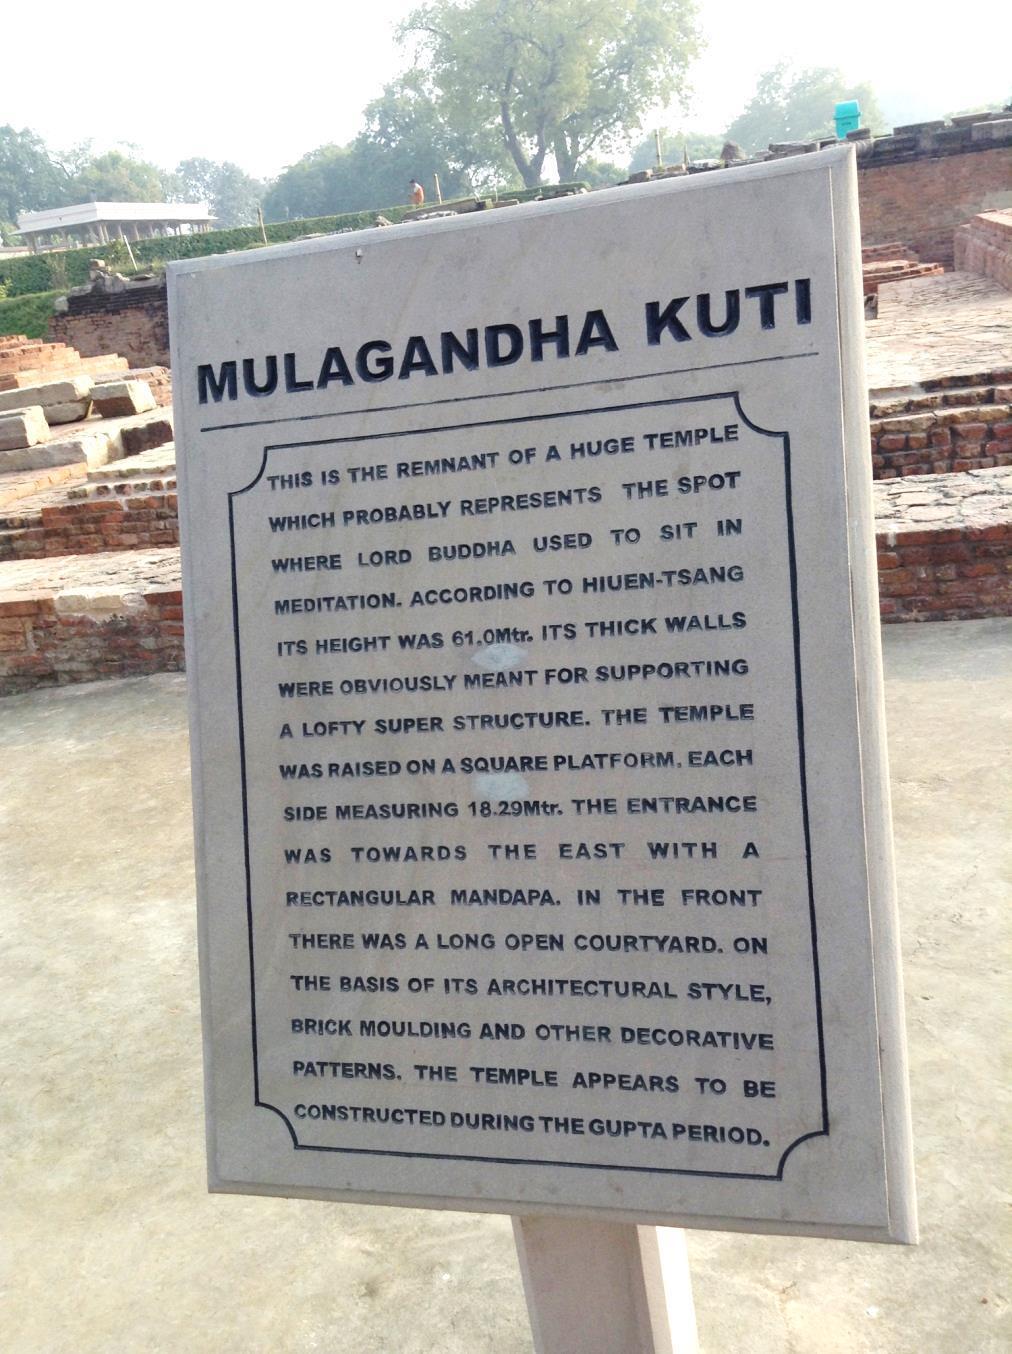 35 Mulagandha Kuti is the remnant of a temple built over the spot where the Buddha used to sit in meditation in Deer Park.